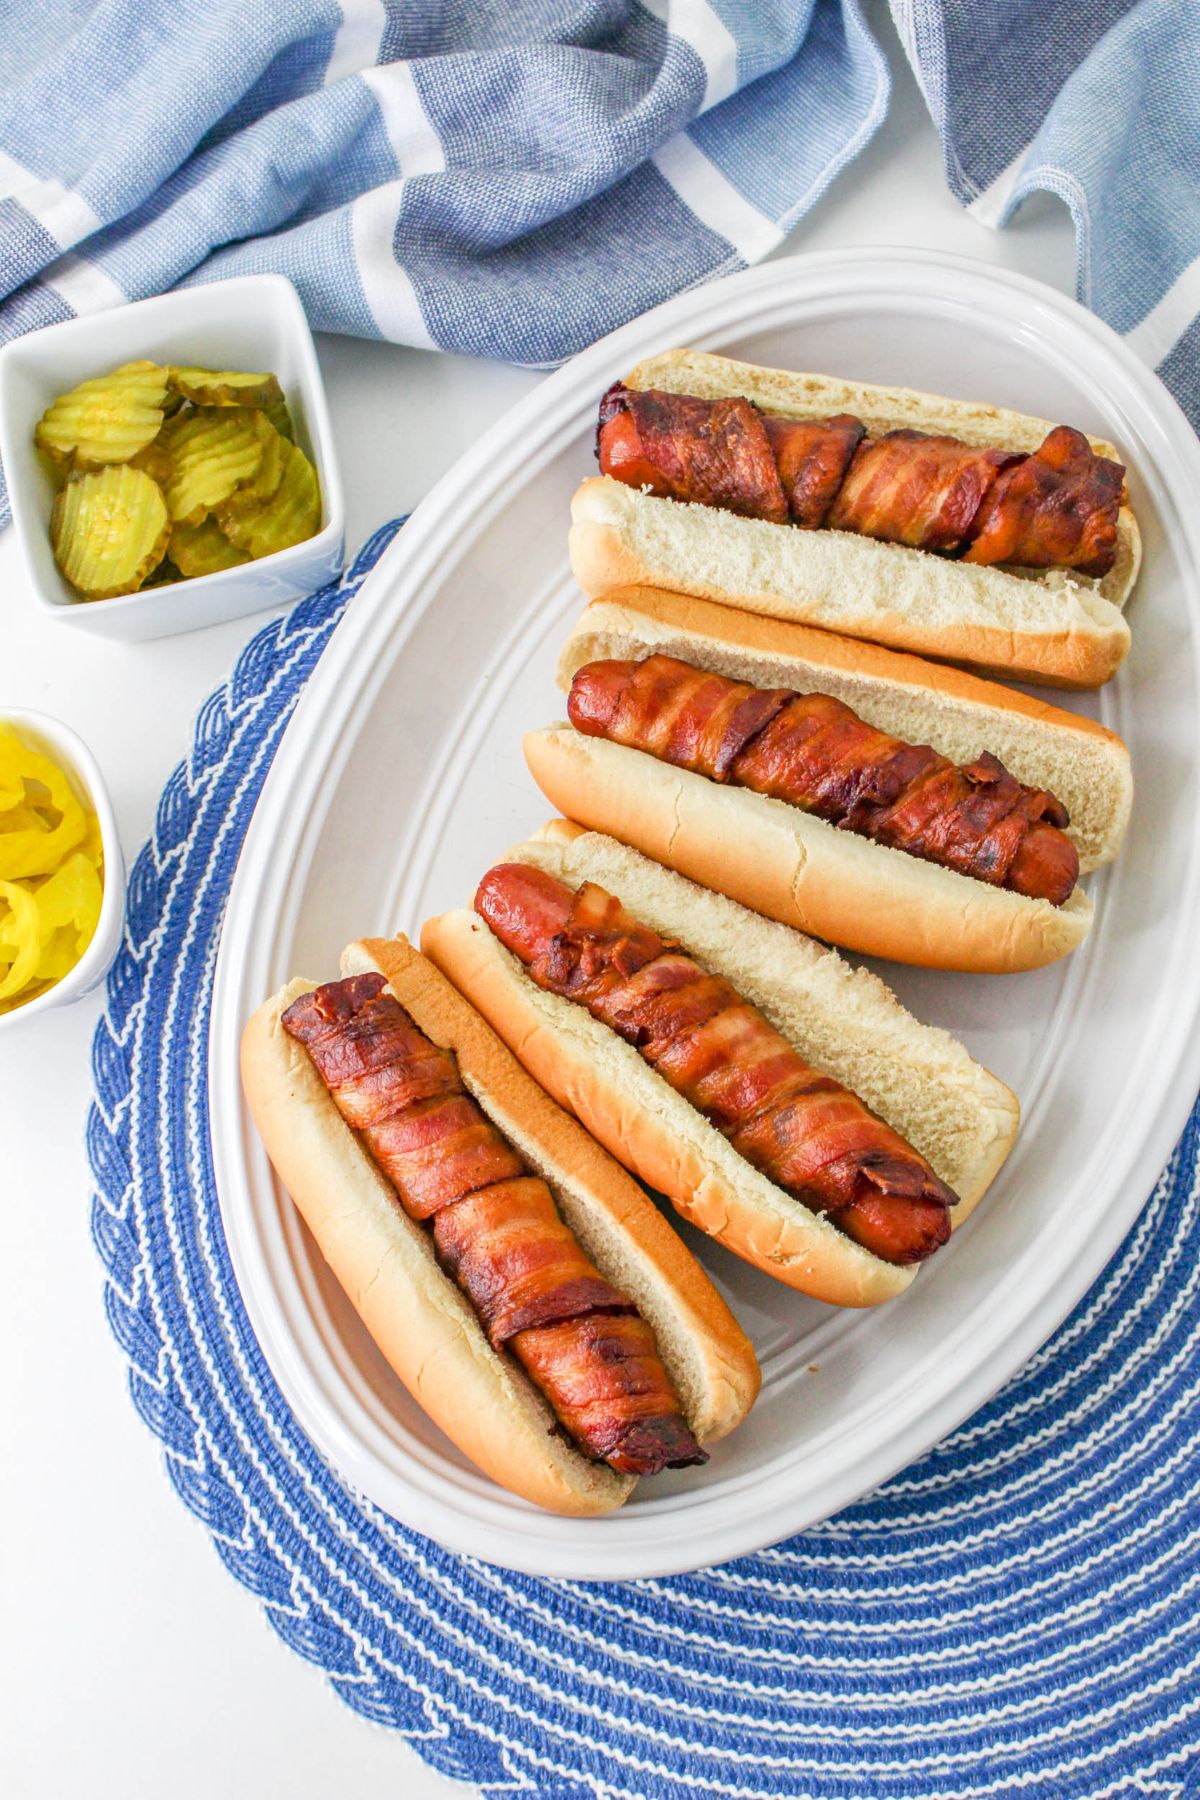 Bacon dogs in a bun on a white plate.